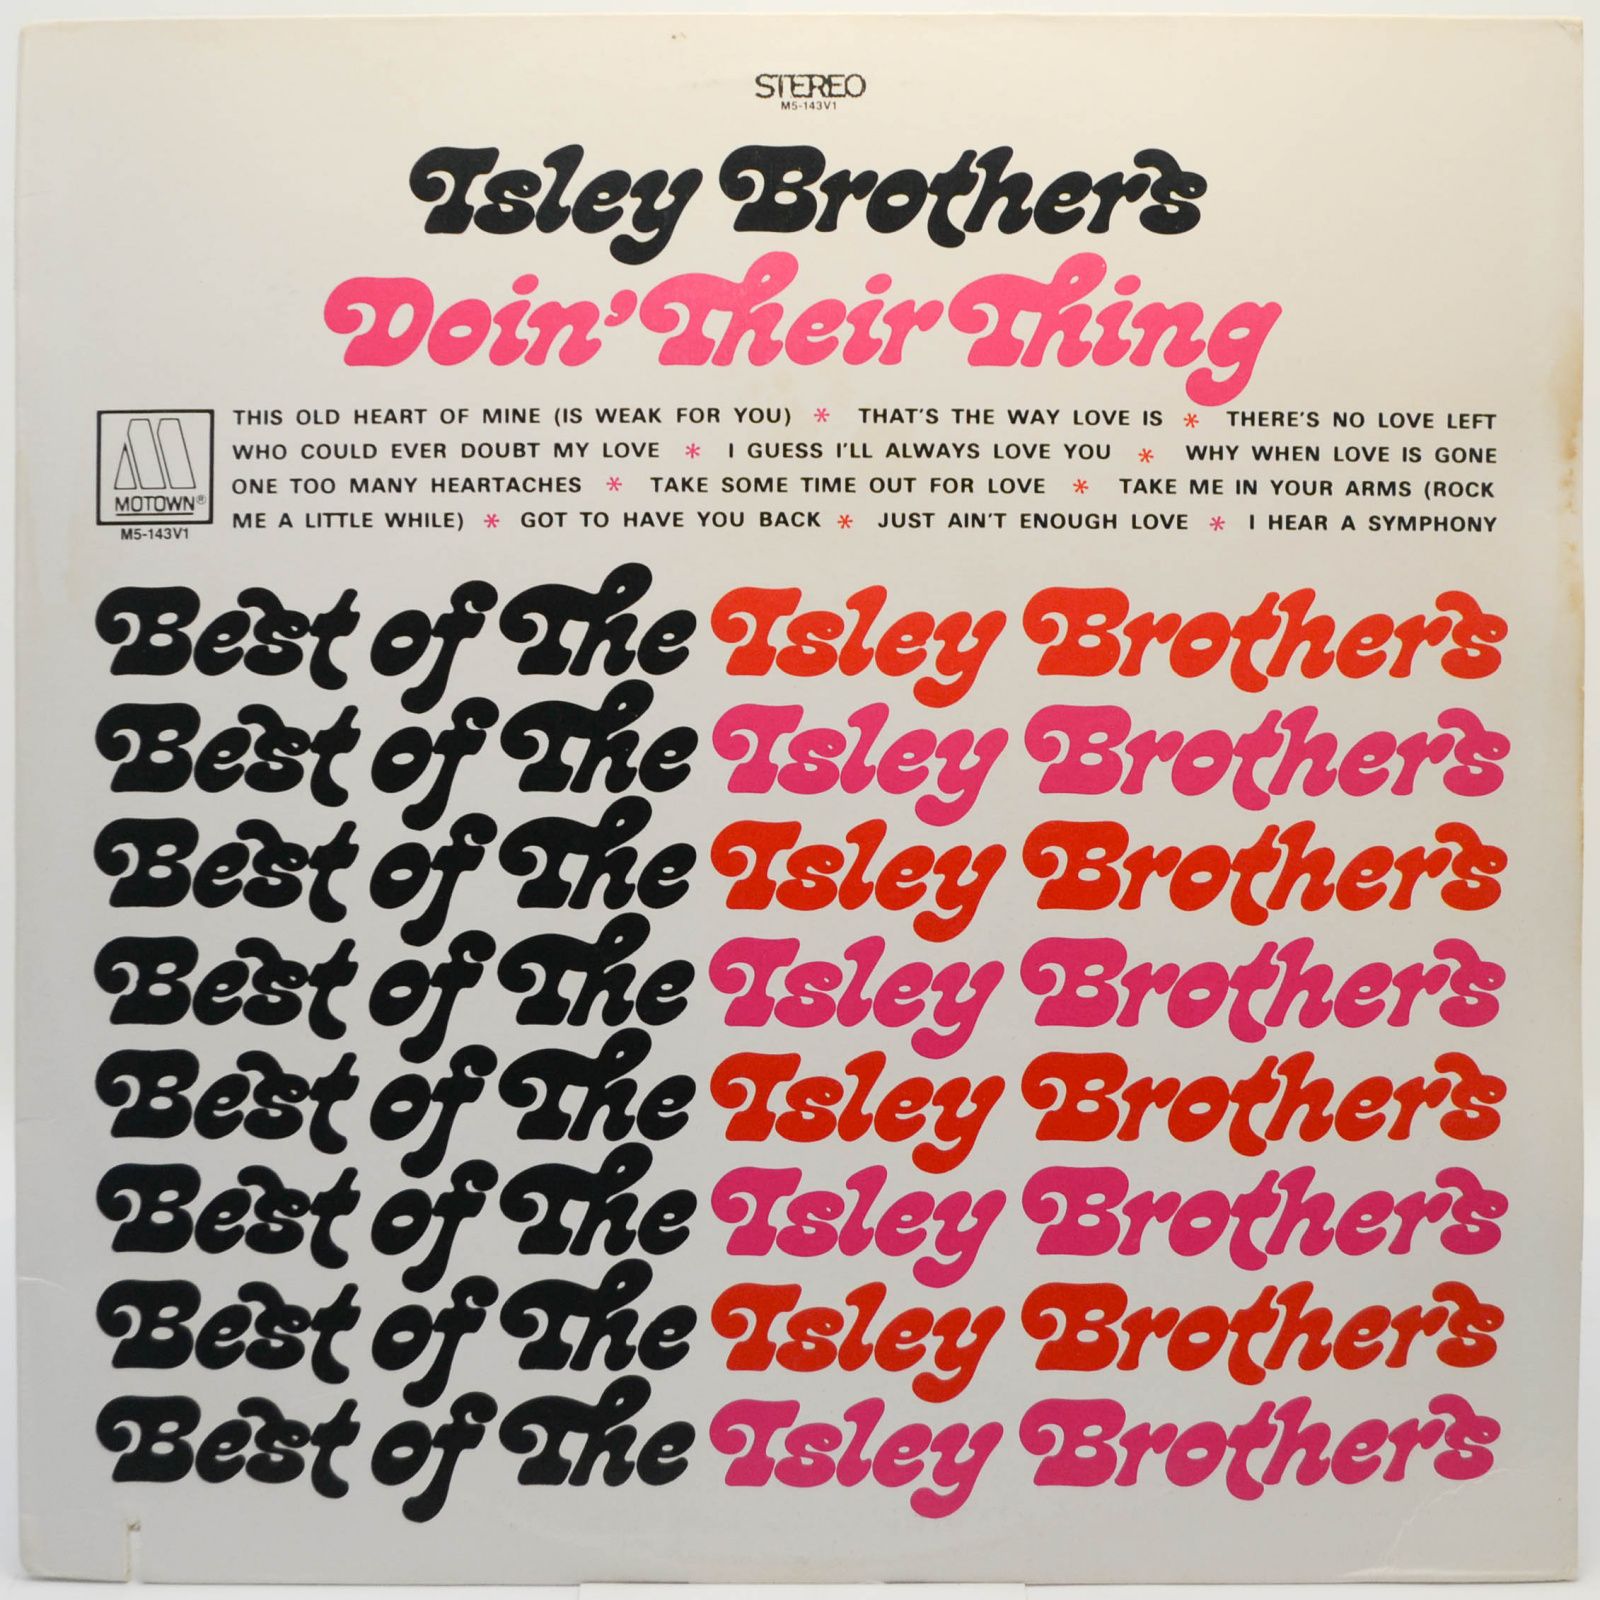 Isley Brothers — Doin’ Their Thing, 1981